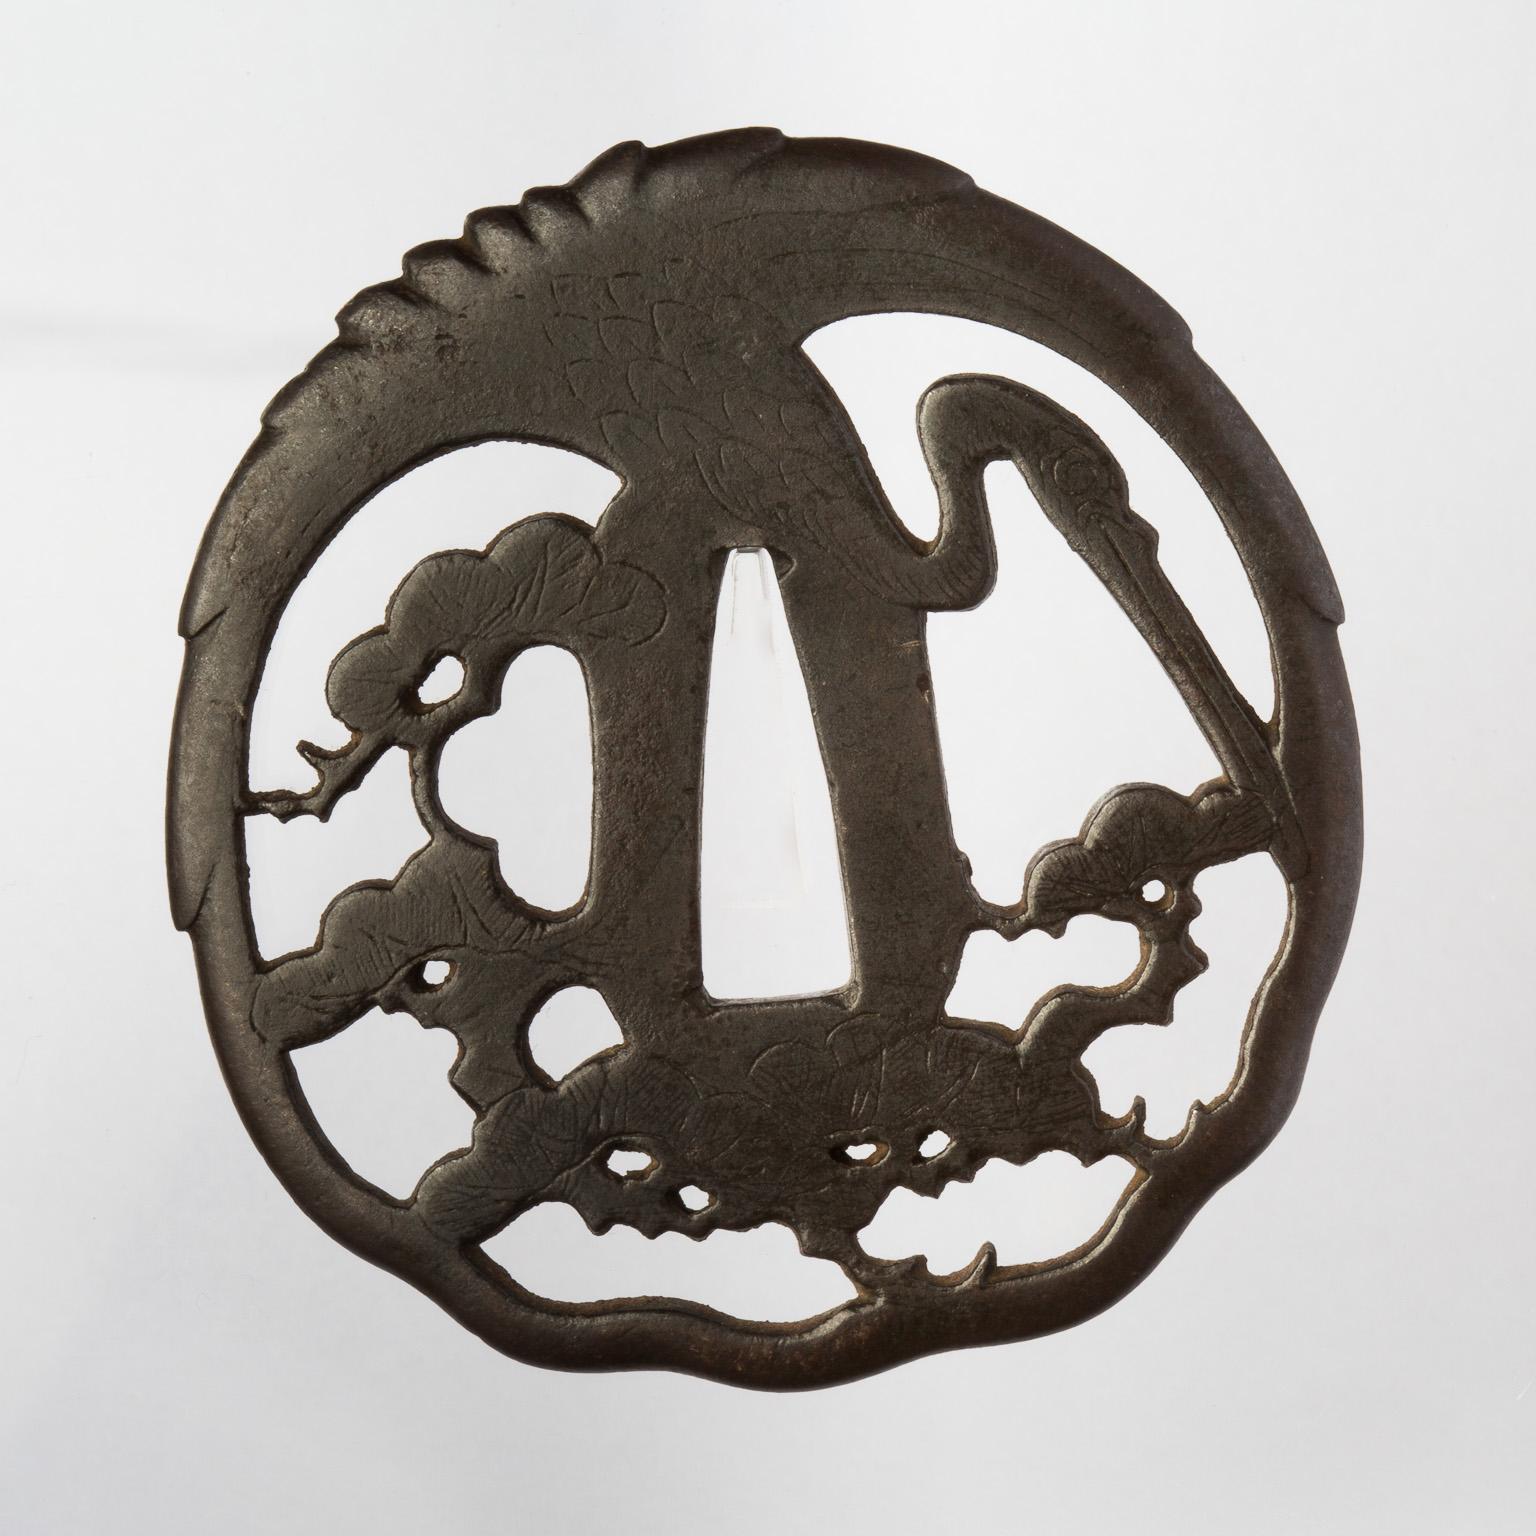 Maru-gata: 7.2 x 6.7 cm
Thickness: 4.2 mm
Higo Nishigaki tsuba representing a fine and elegantly stylized crane (tsuru) with outstretched wings, flying over some pines trees. The bird's wings form the upper edge of the tsuba itself.